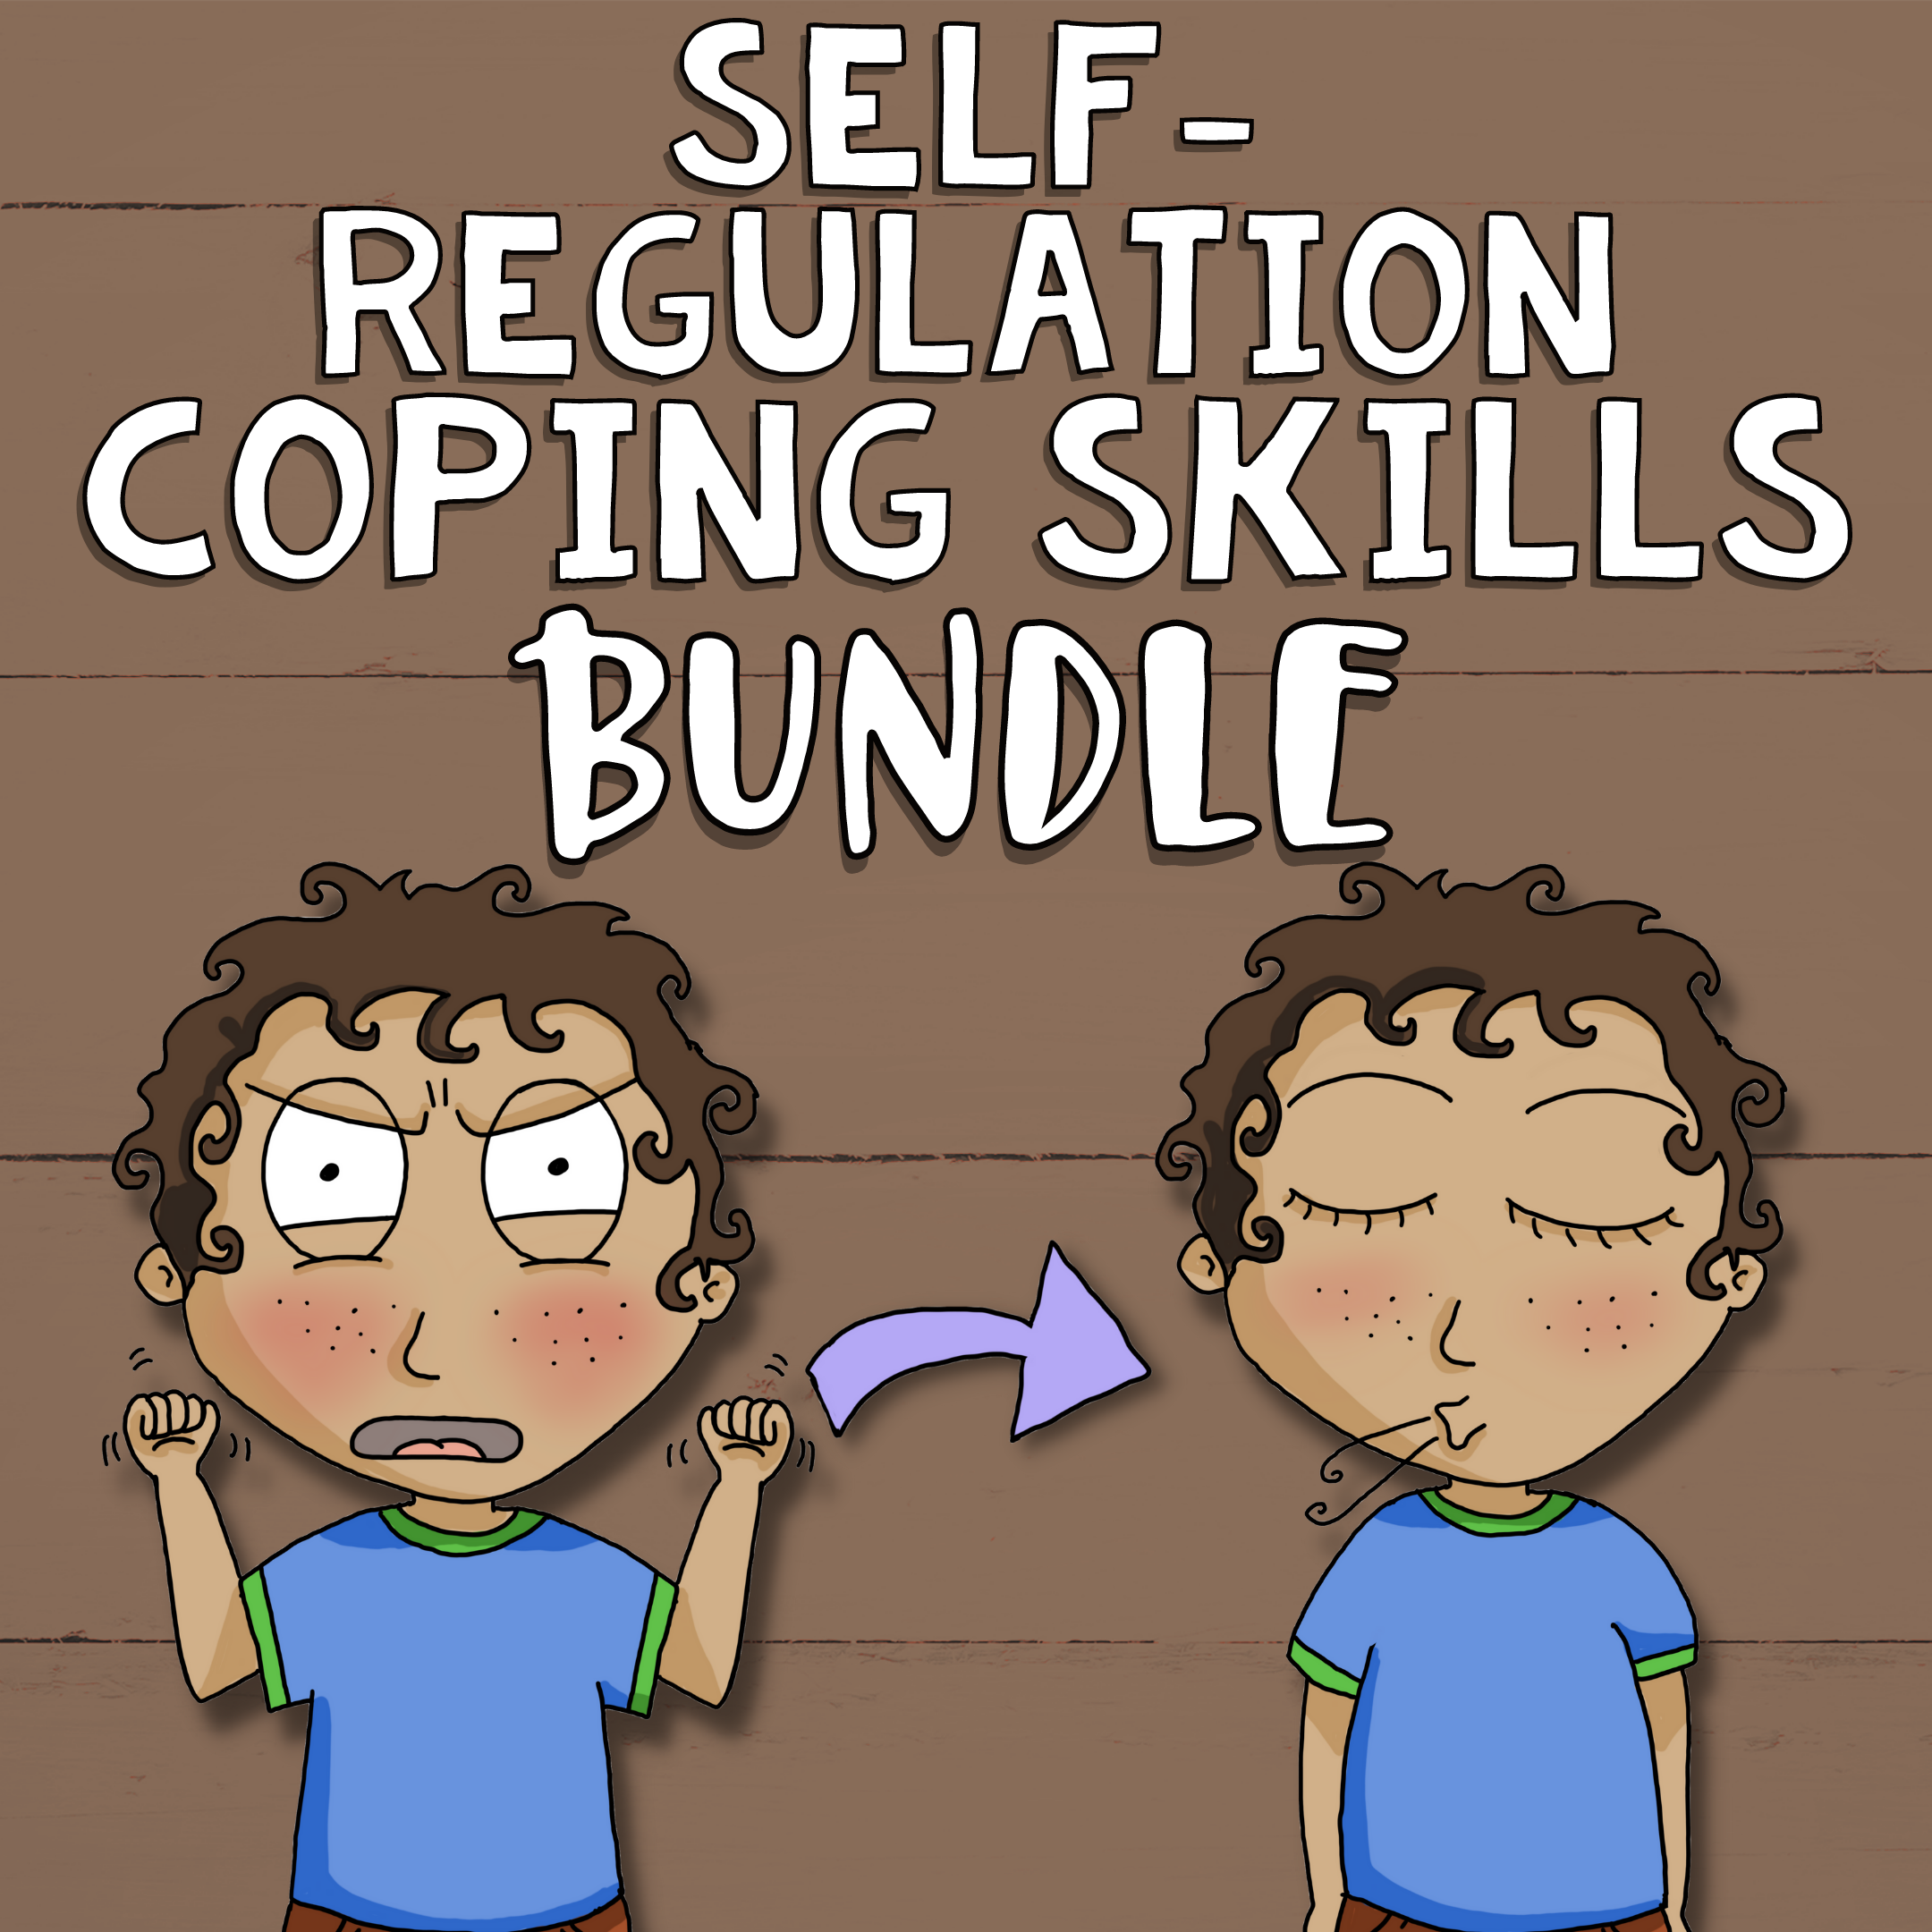 Self-Regulation Coping Skills for Kids Bundle: Social Emotional Learning Activities for Classrooms